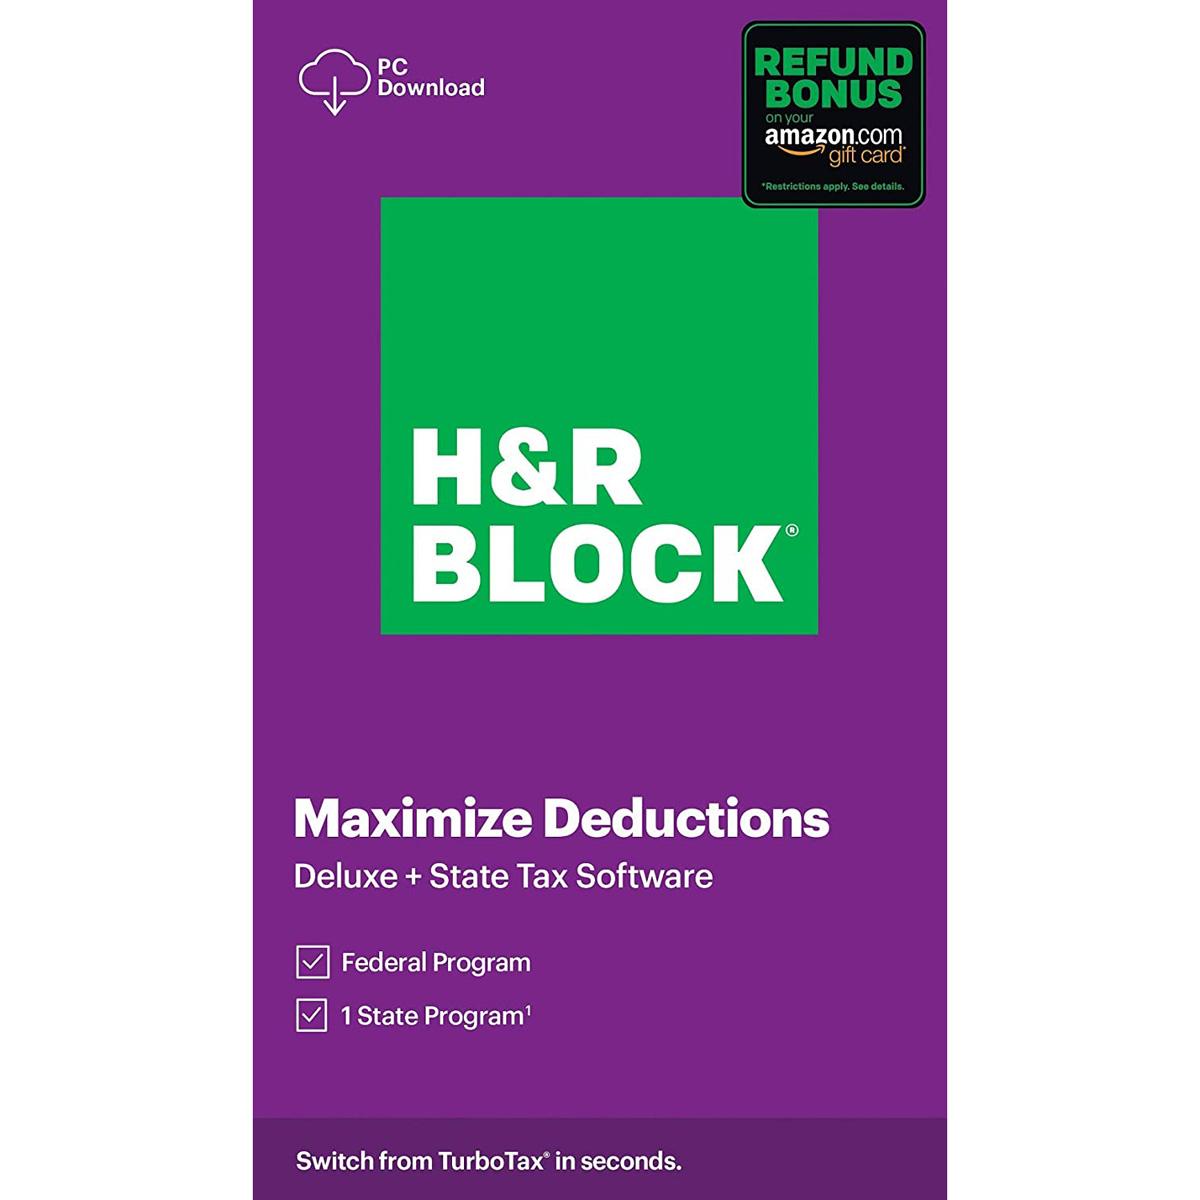 H&R Block Tax Software Deluxe and State 2020 for $16.99